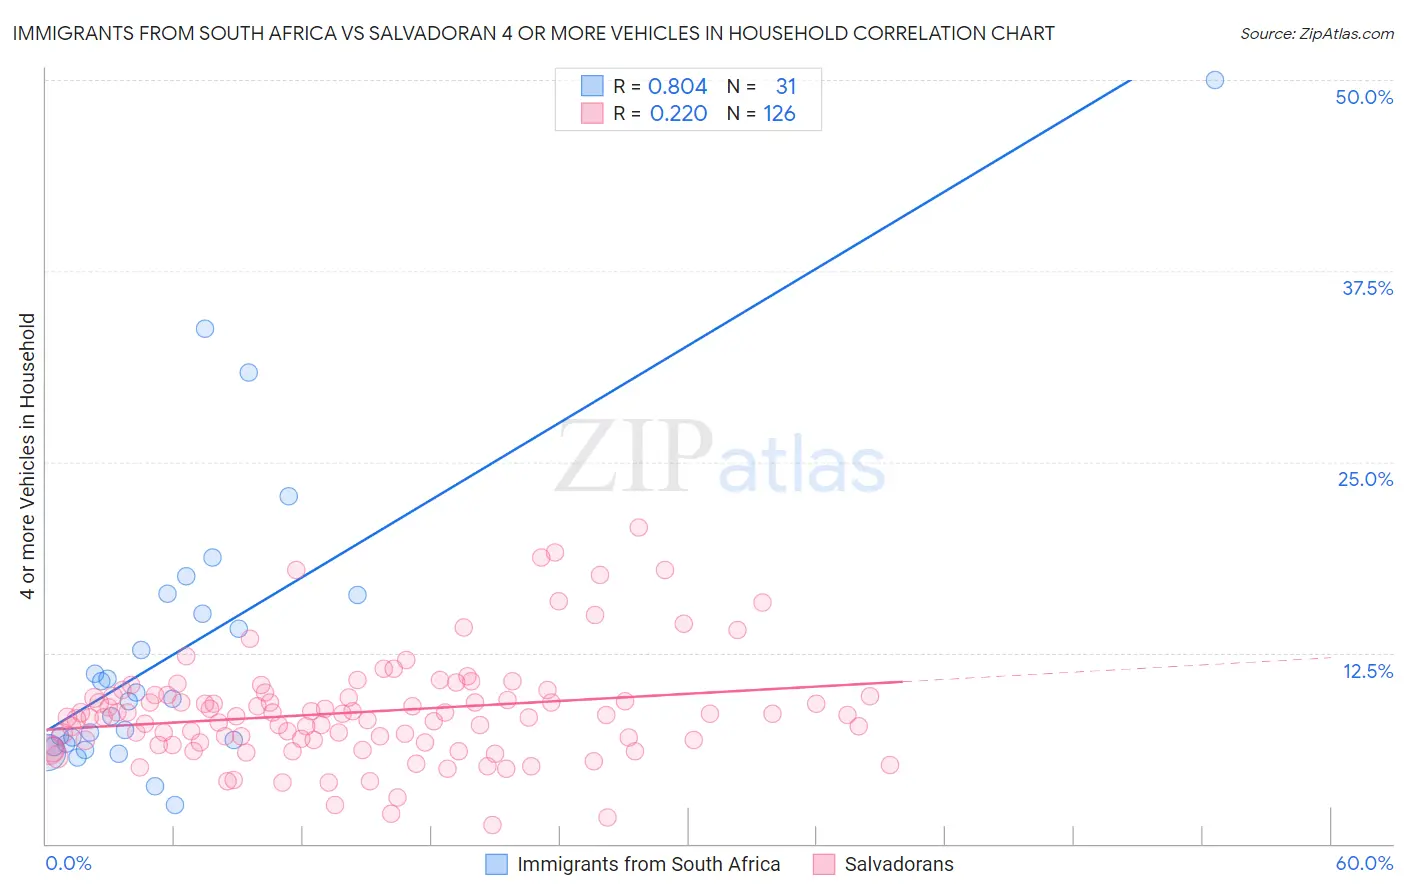 Immigrants from South Africa vs Salvadoran 4 or more Vehicles in Household